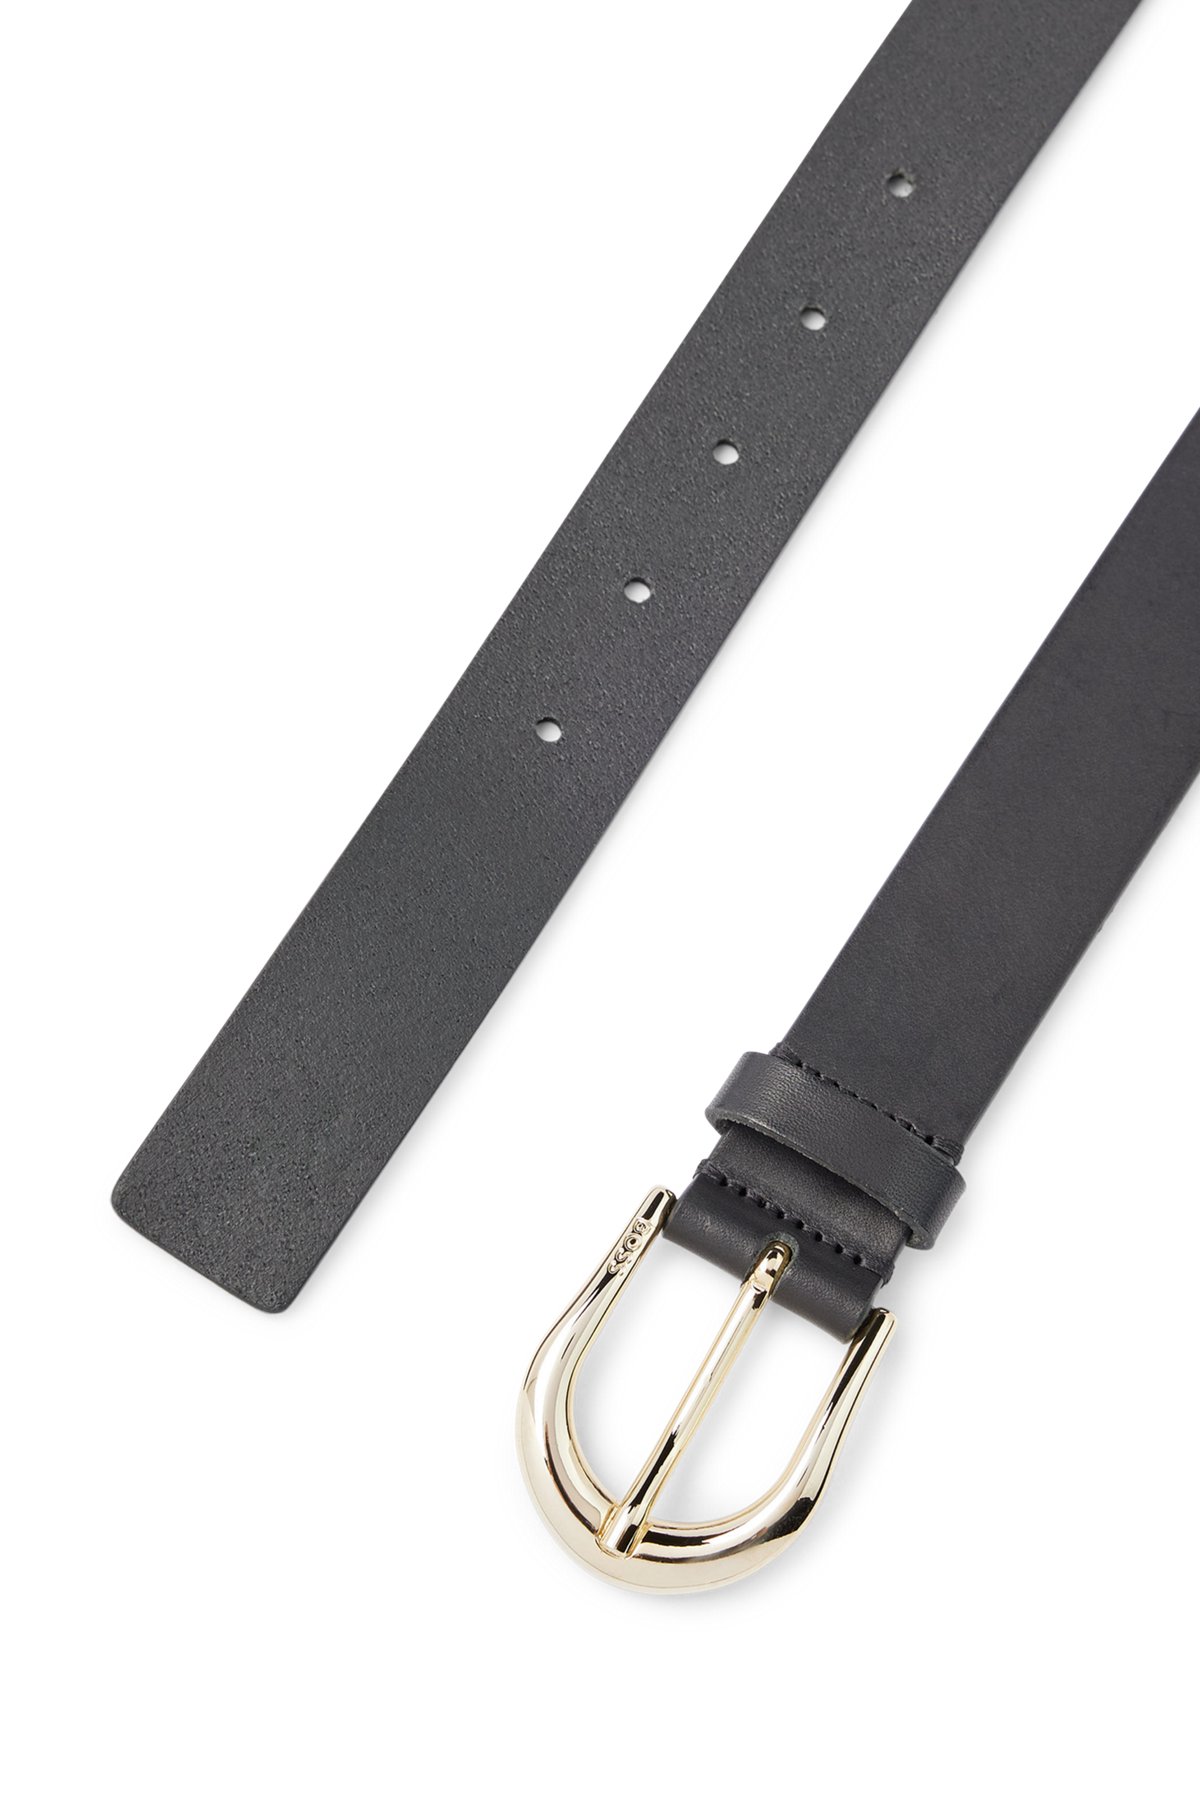 Italian-leather belt with rounded buckle, Black